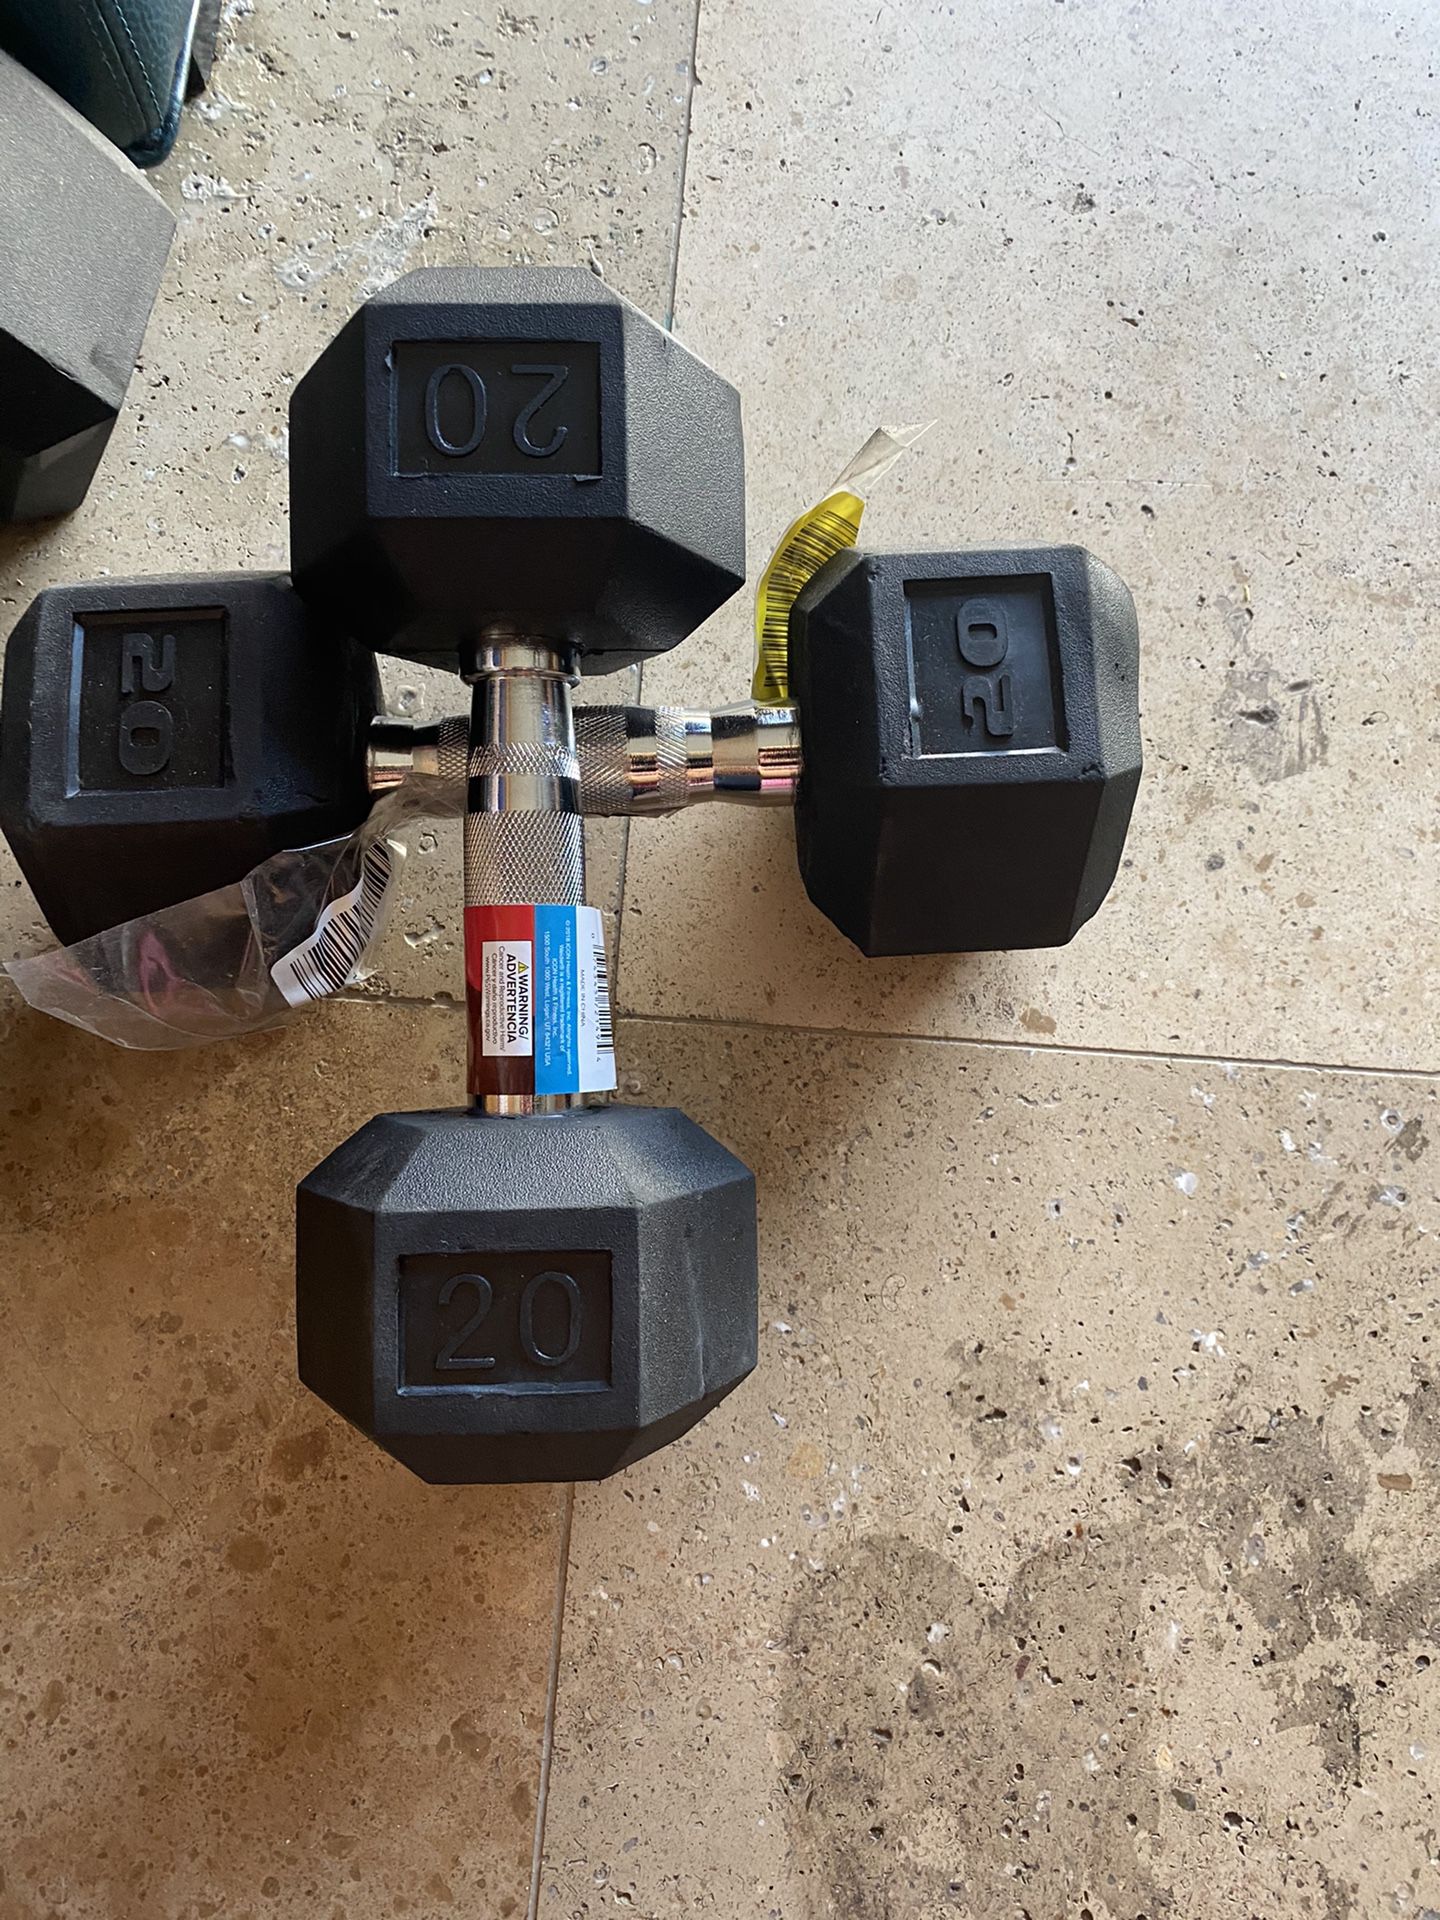 20LB dumbbell pair 20 LB dumbbells weight set of 2 dumbbells 20 pounds each weights